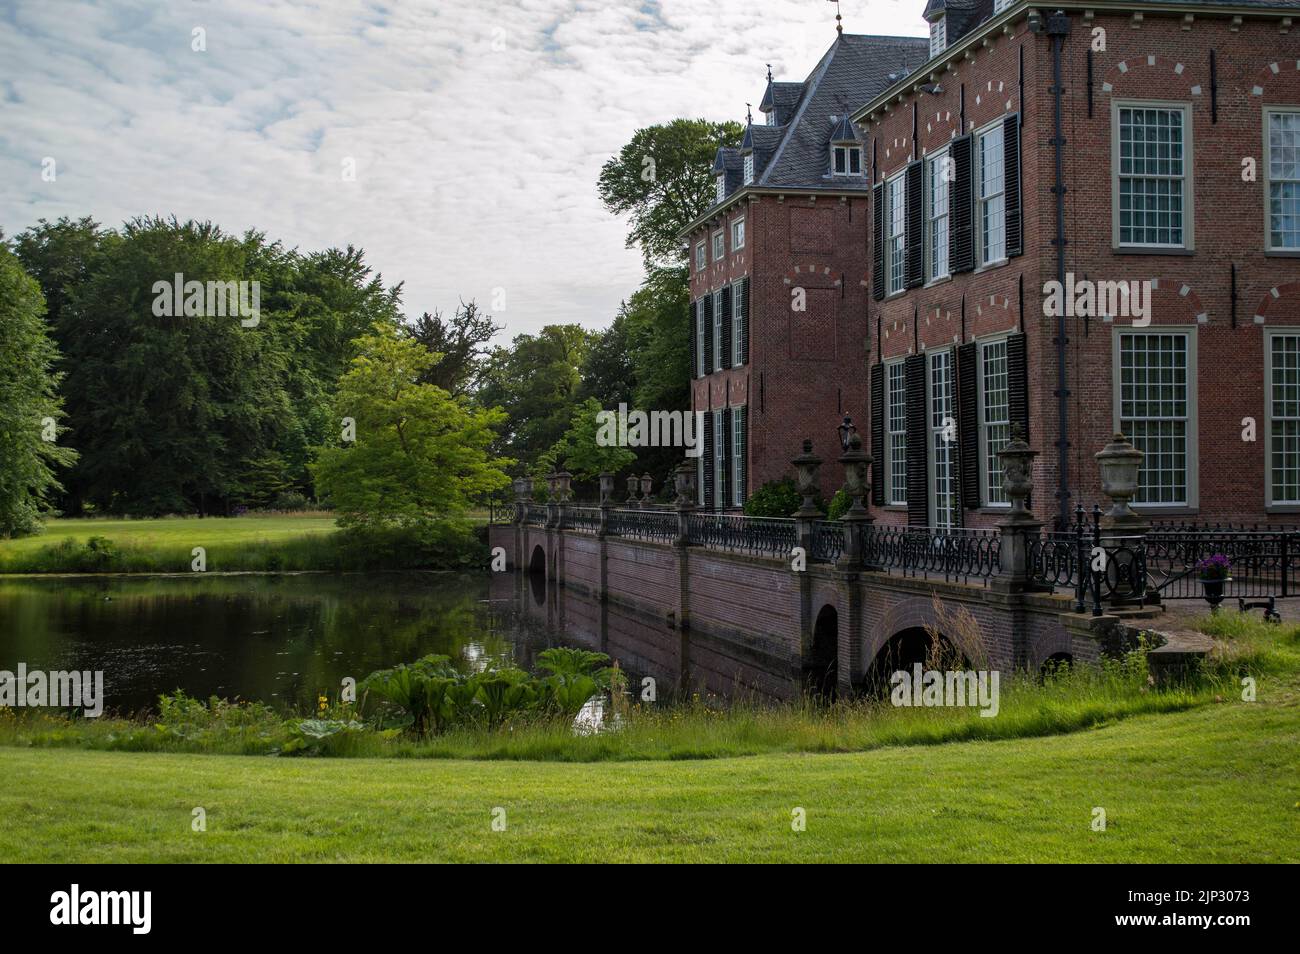 The beautiful Duivenvoorde Castle in Voorschoten, the Netherlands, with a river in front and trees in the background Stock Photo